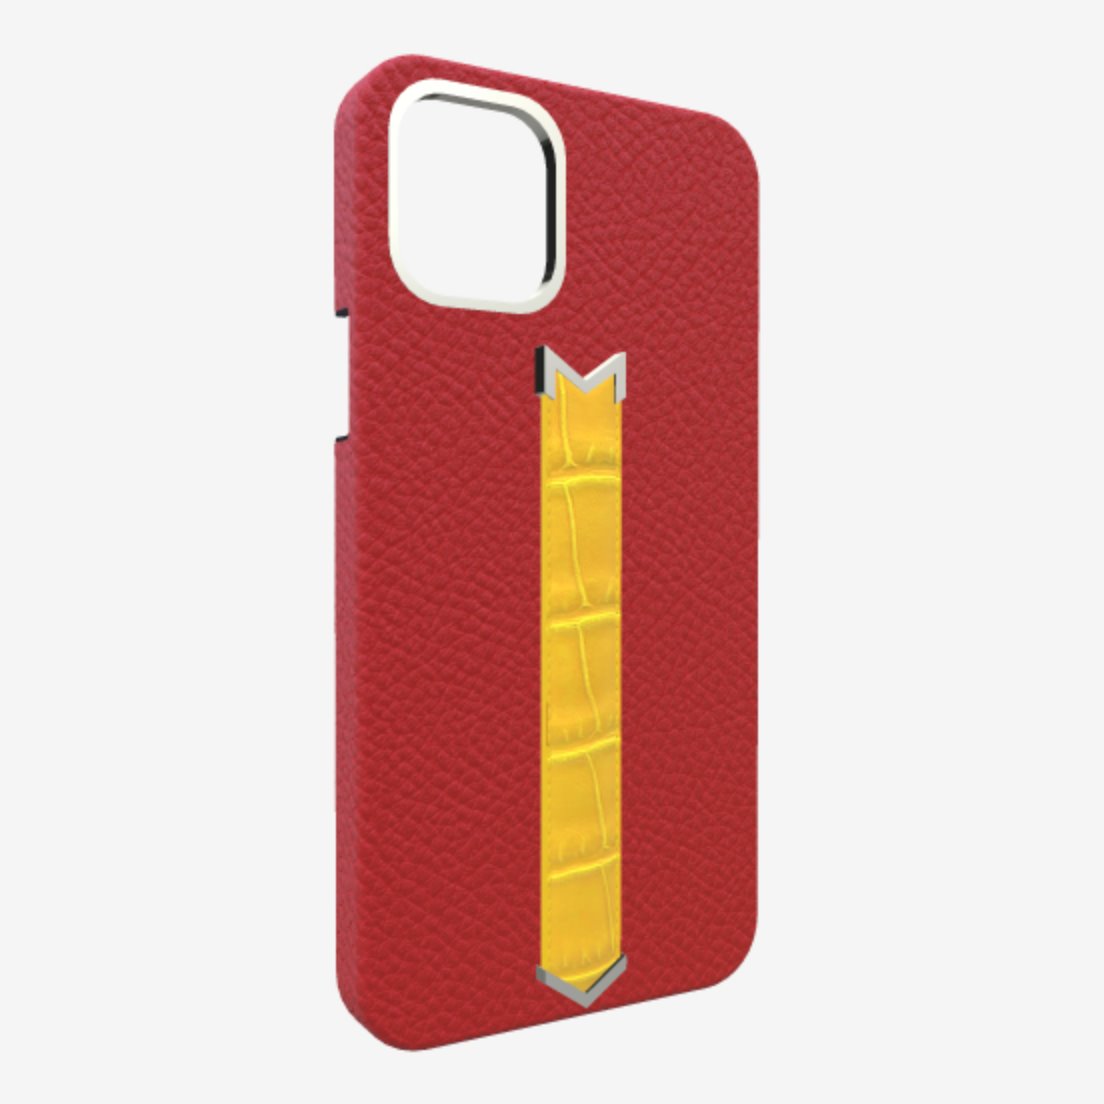 Silver Finger Strap Case for iPhone 13 Pro Max in Genuine Calfskin and Alligator Glamour-Red Summer-Yellow 